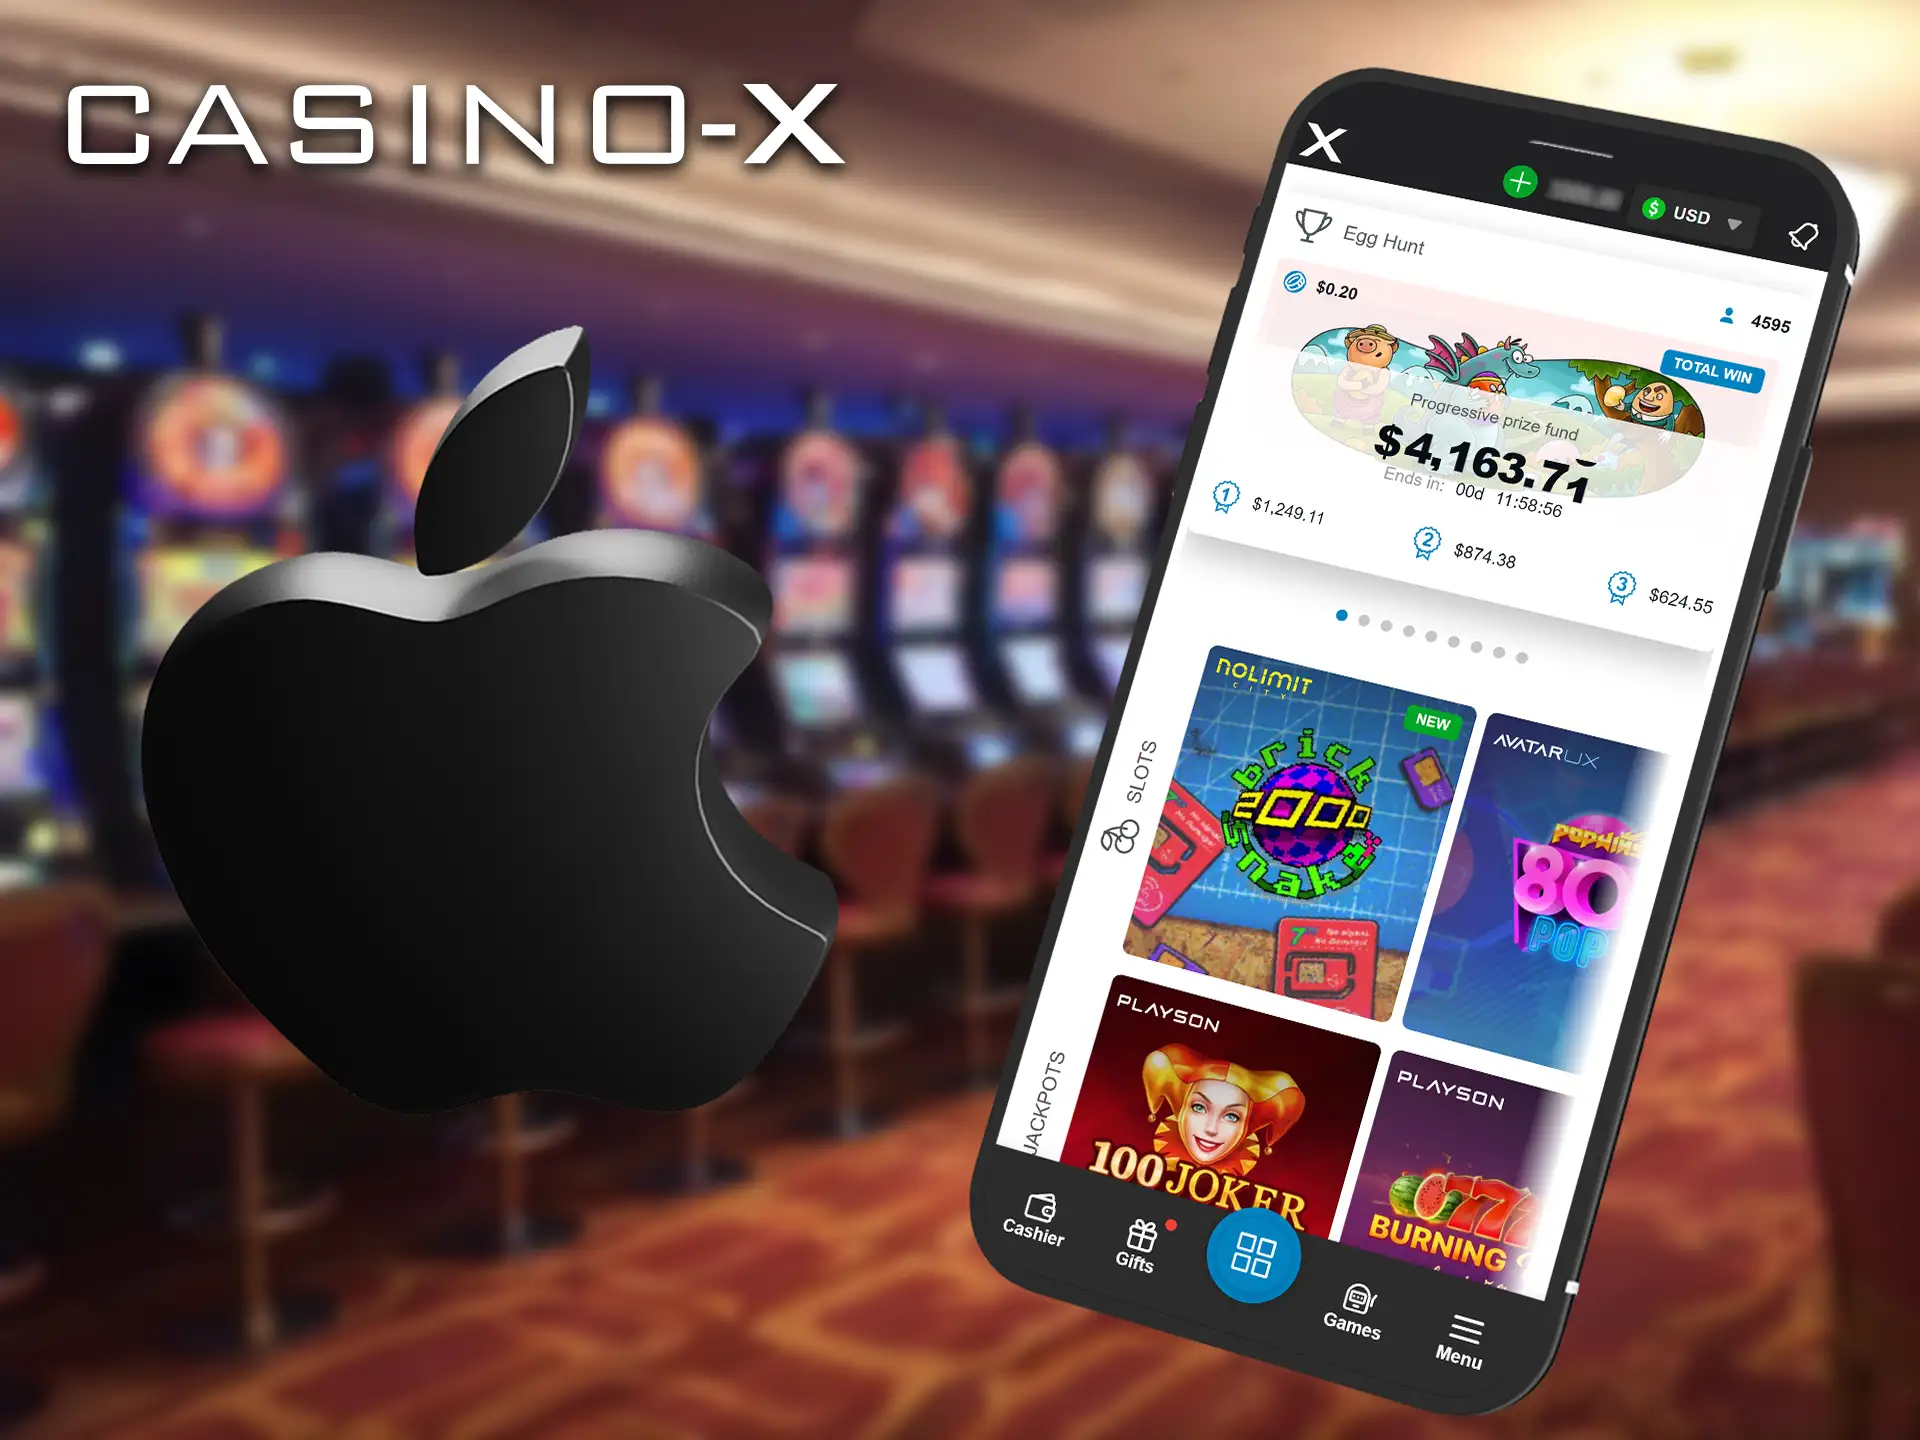 Casino-X is available for download on your iOS device.